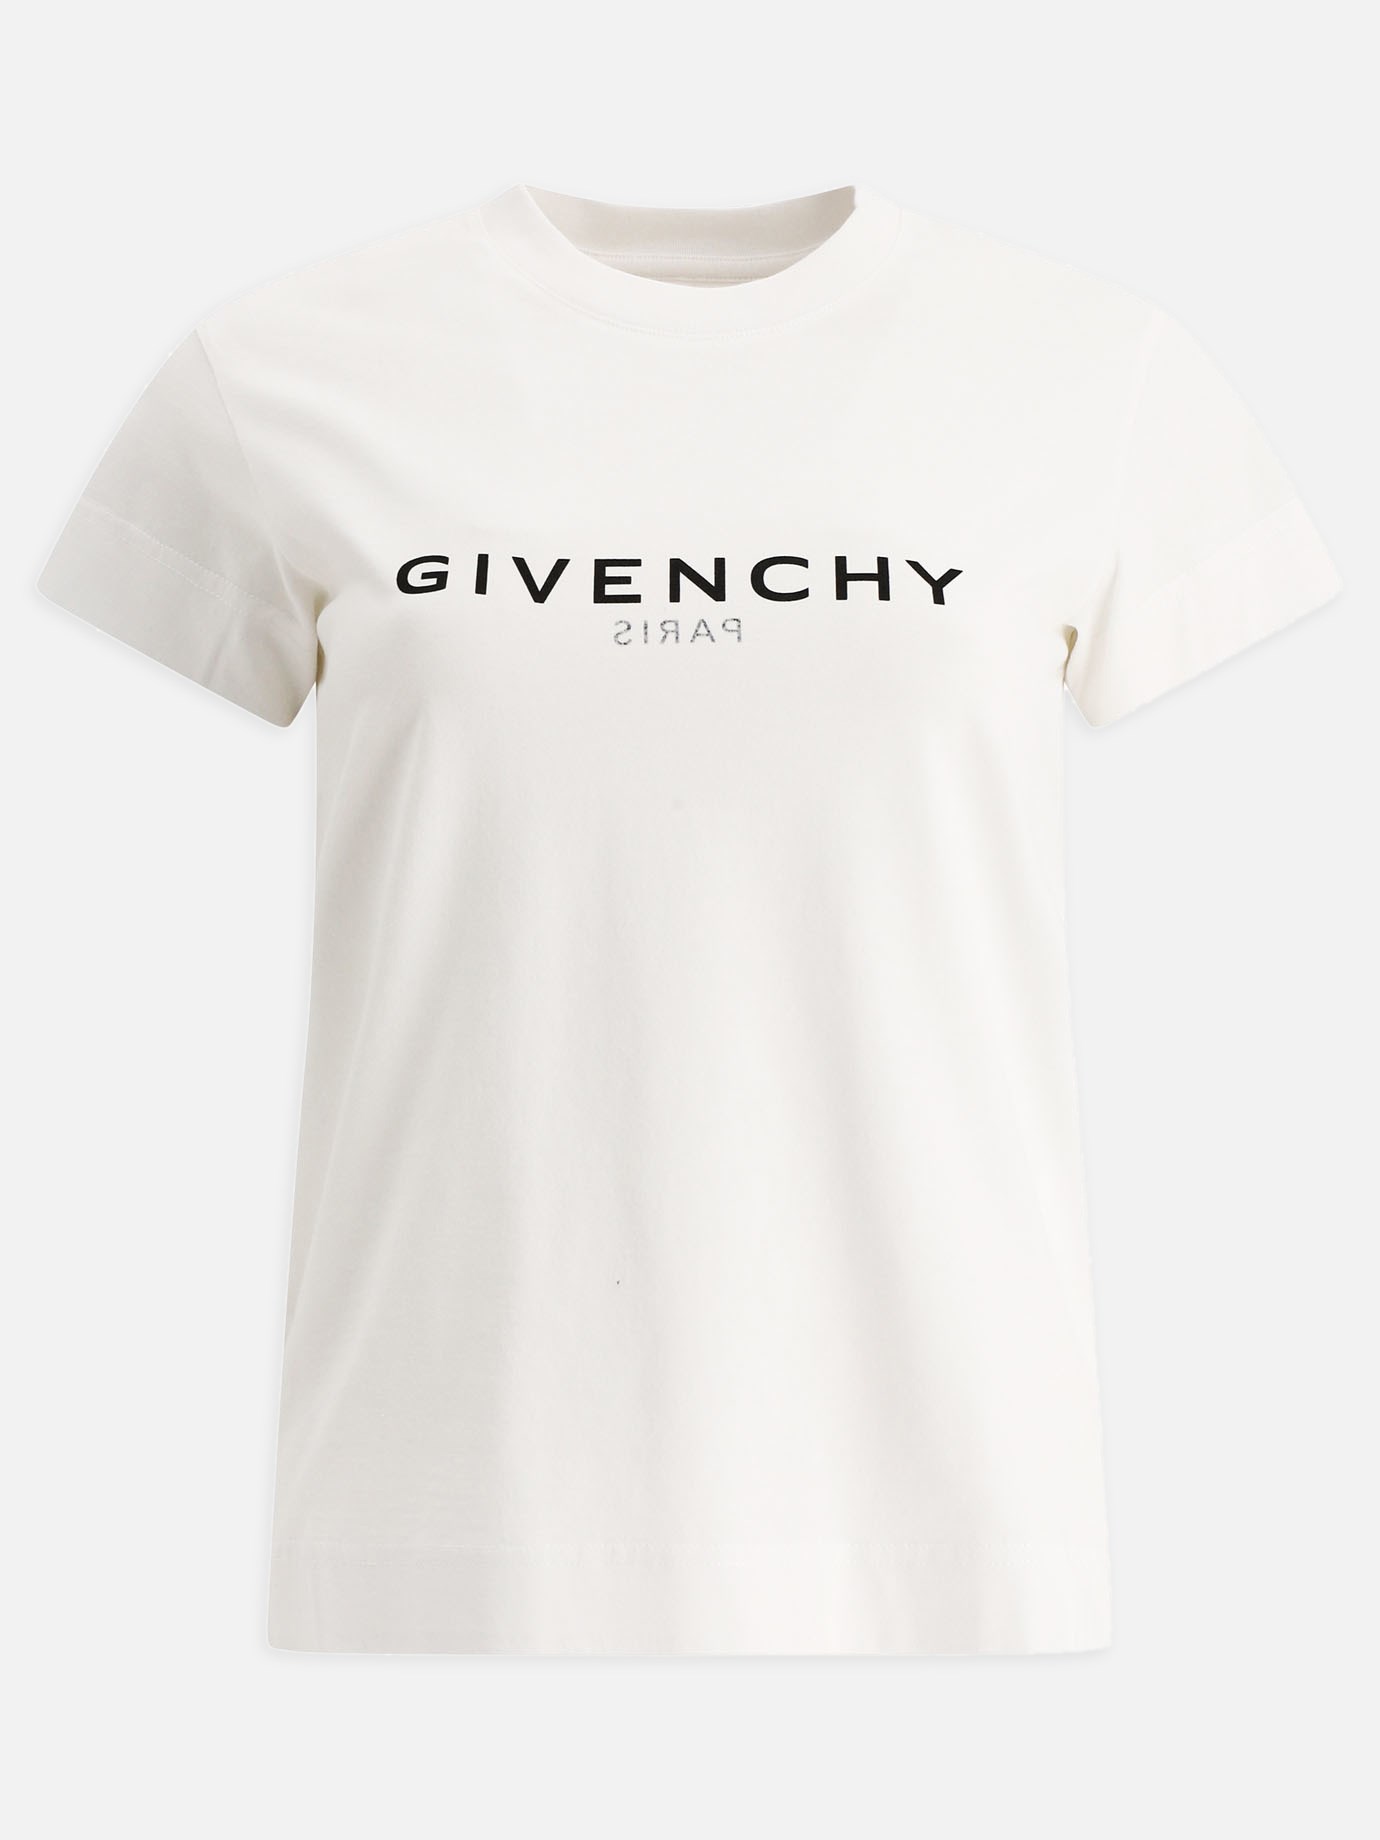  Givenchy Reverse  t-shirtby Givenchy - 4